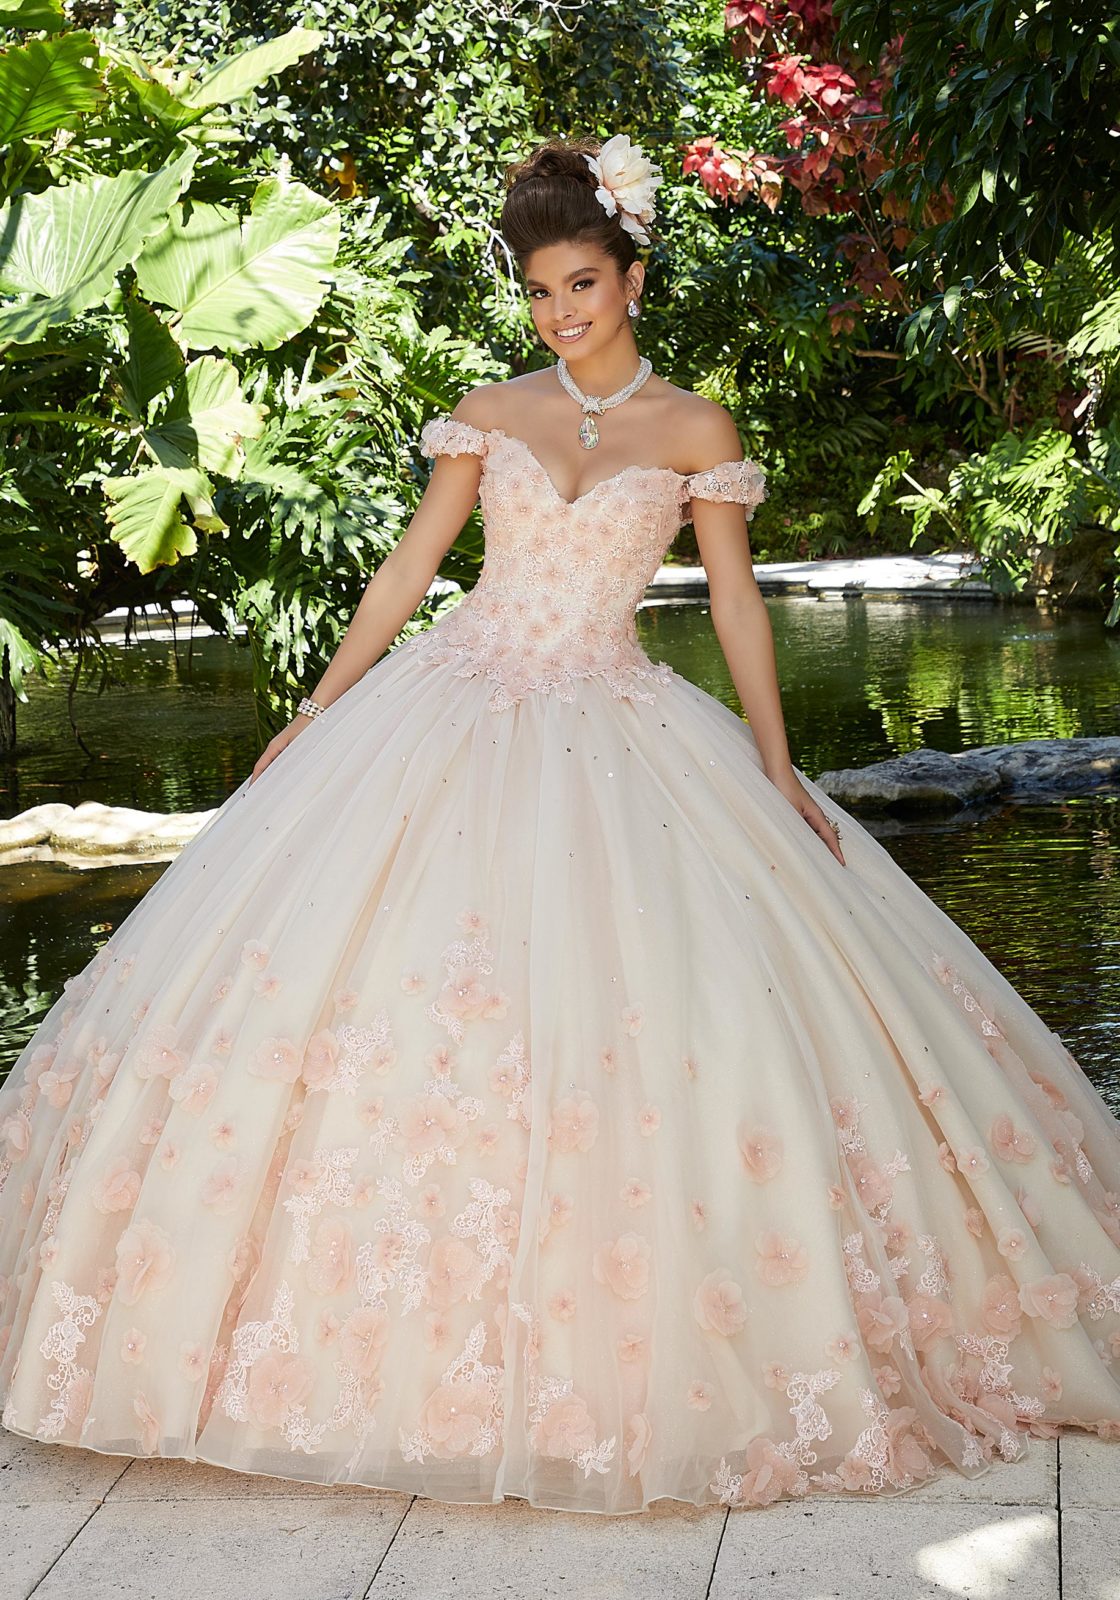 Crystal Beaded, Three-Dimensional Floral Appliqués on Venice Lace on a Layered Organza Over Sparkle Tulle Ballgown #34015